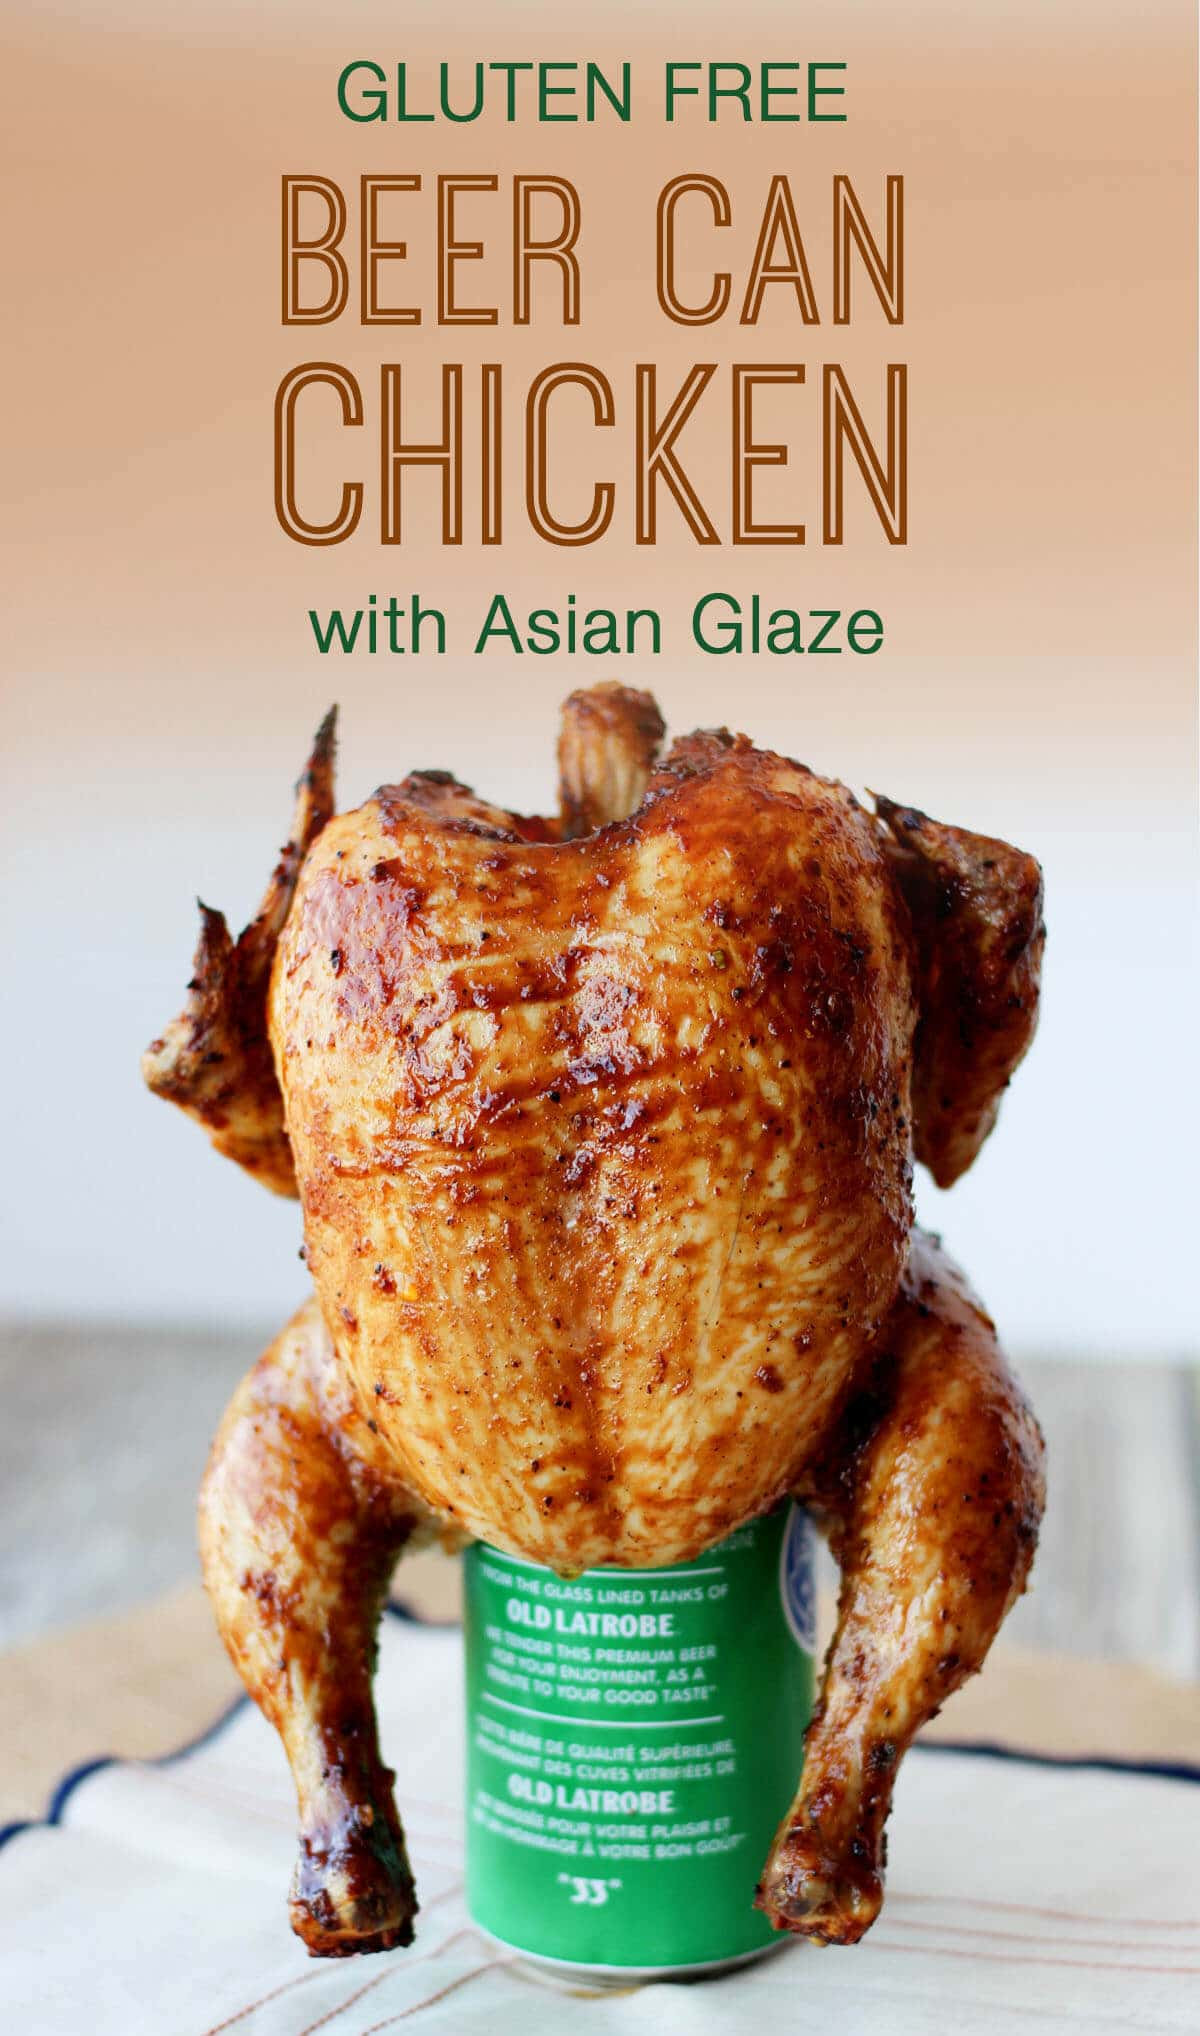 Gluten Free Beer Recipes
 Gluten Free Beer Can Chicken with Asian Glaze